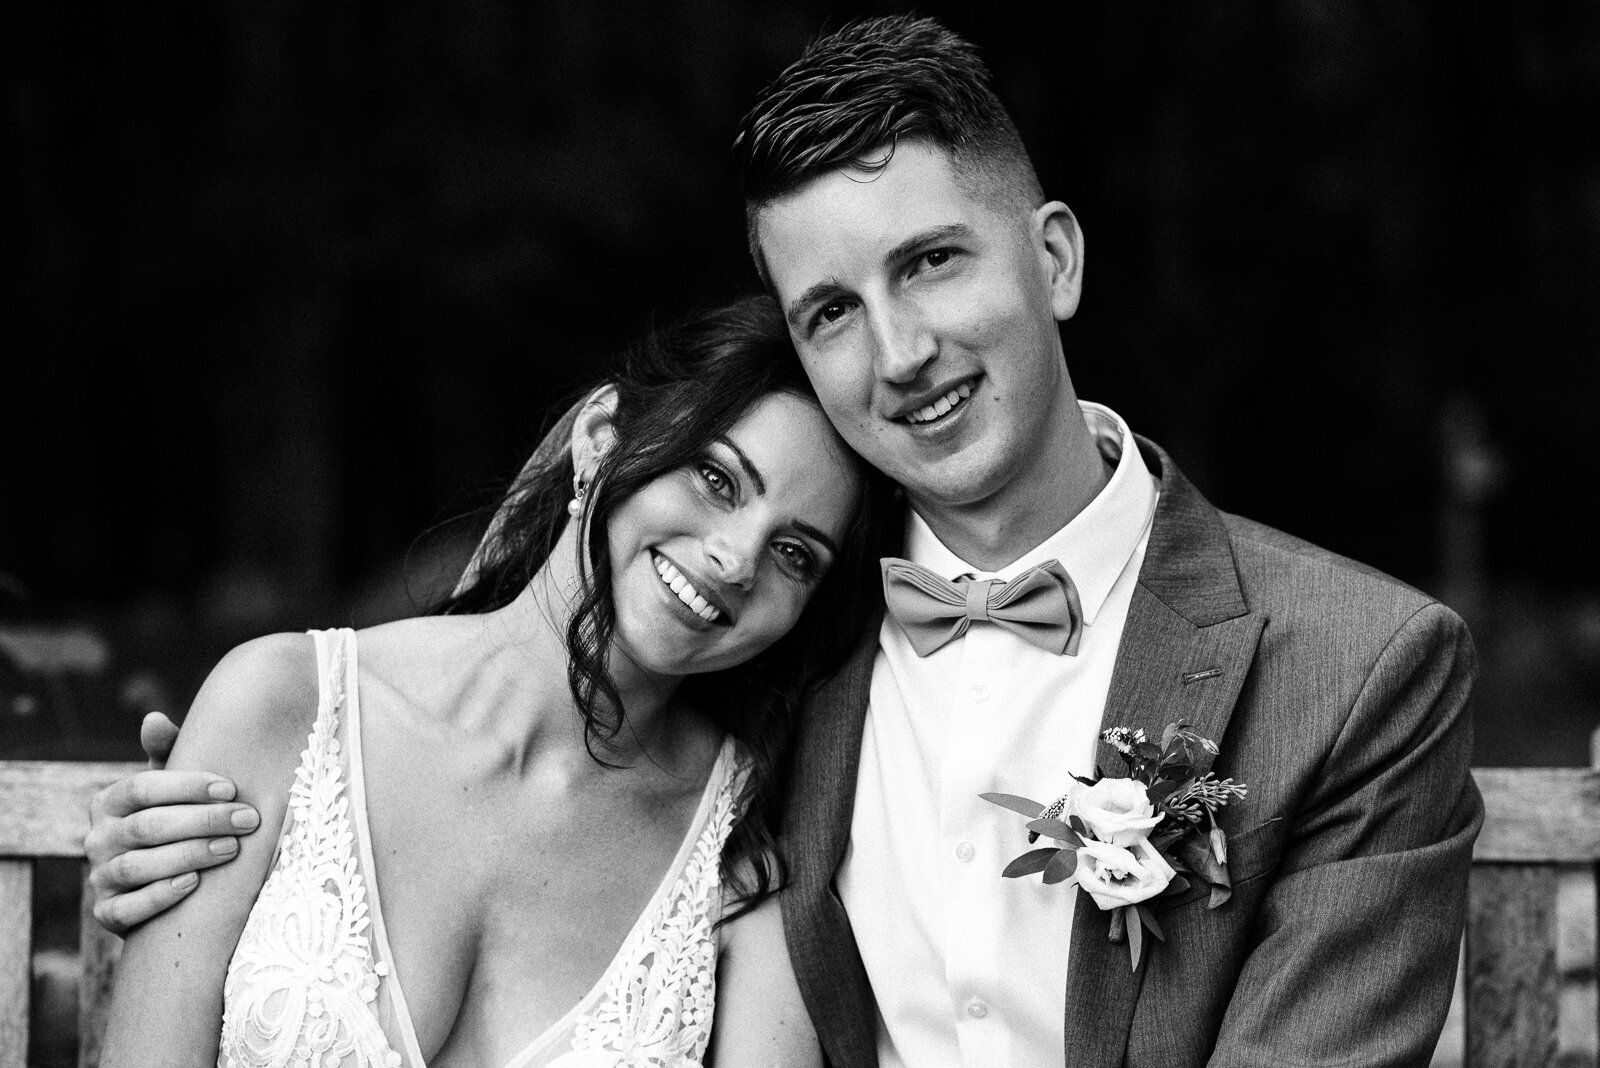 Black and white portrait of bride and groom